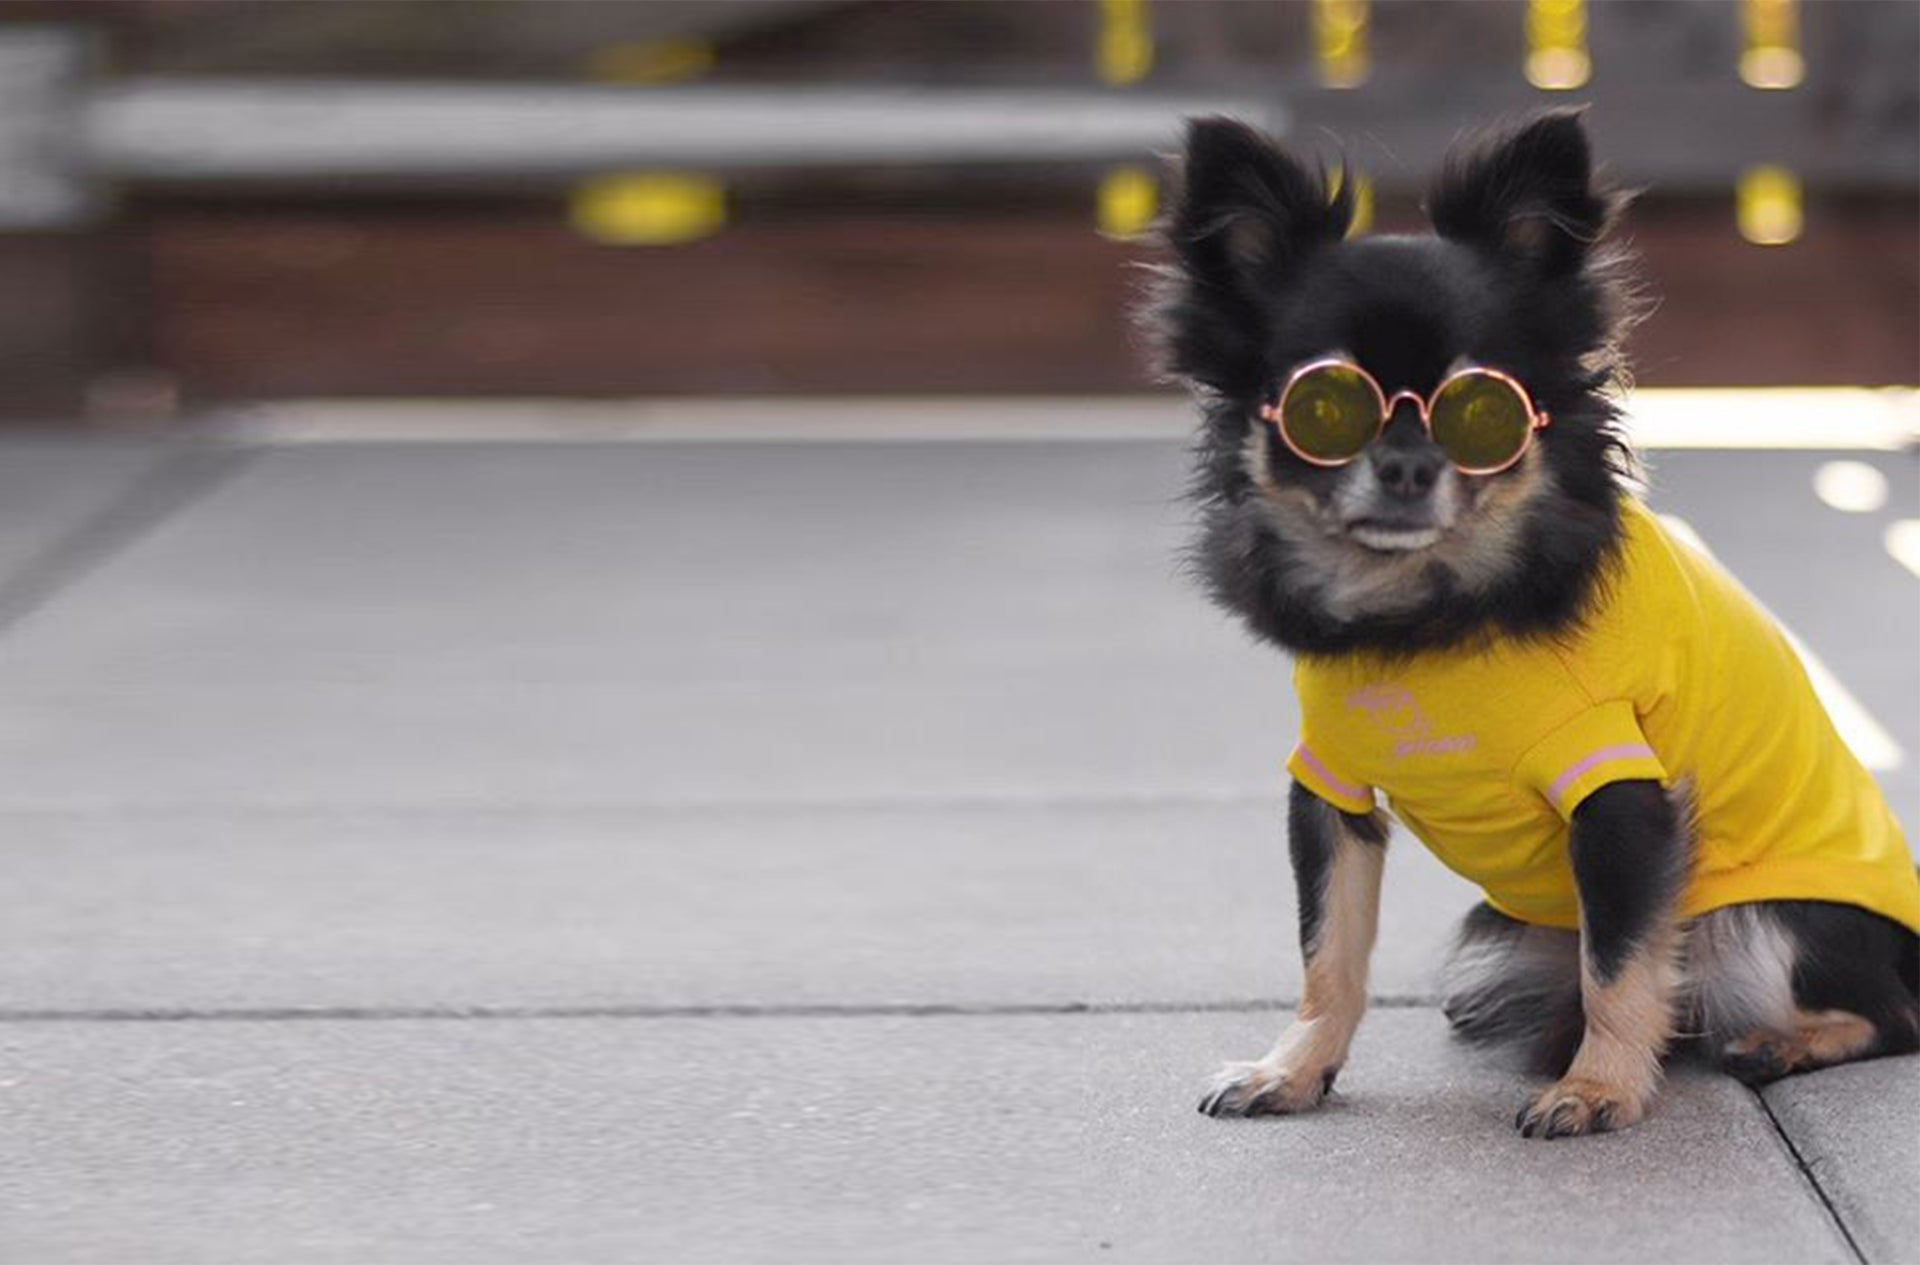 A dog wearing sunglasses and Over Glam t-shirt